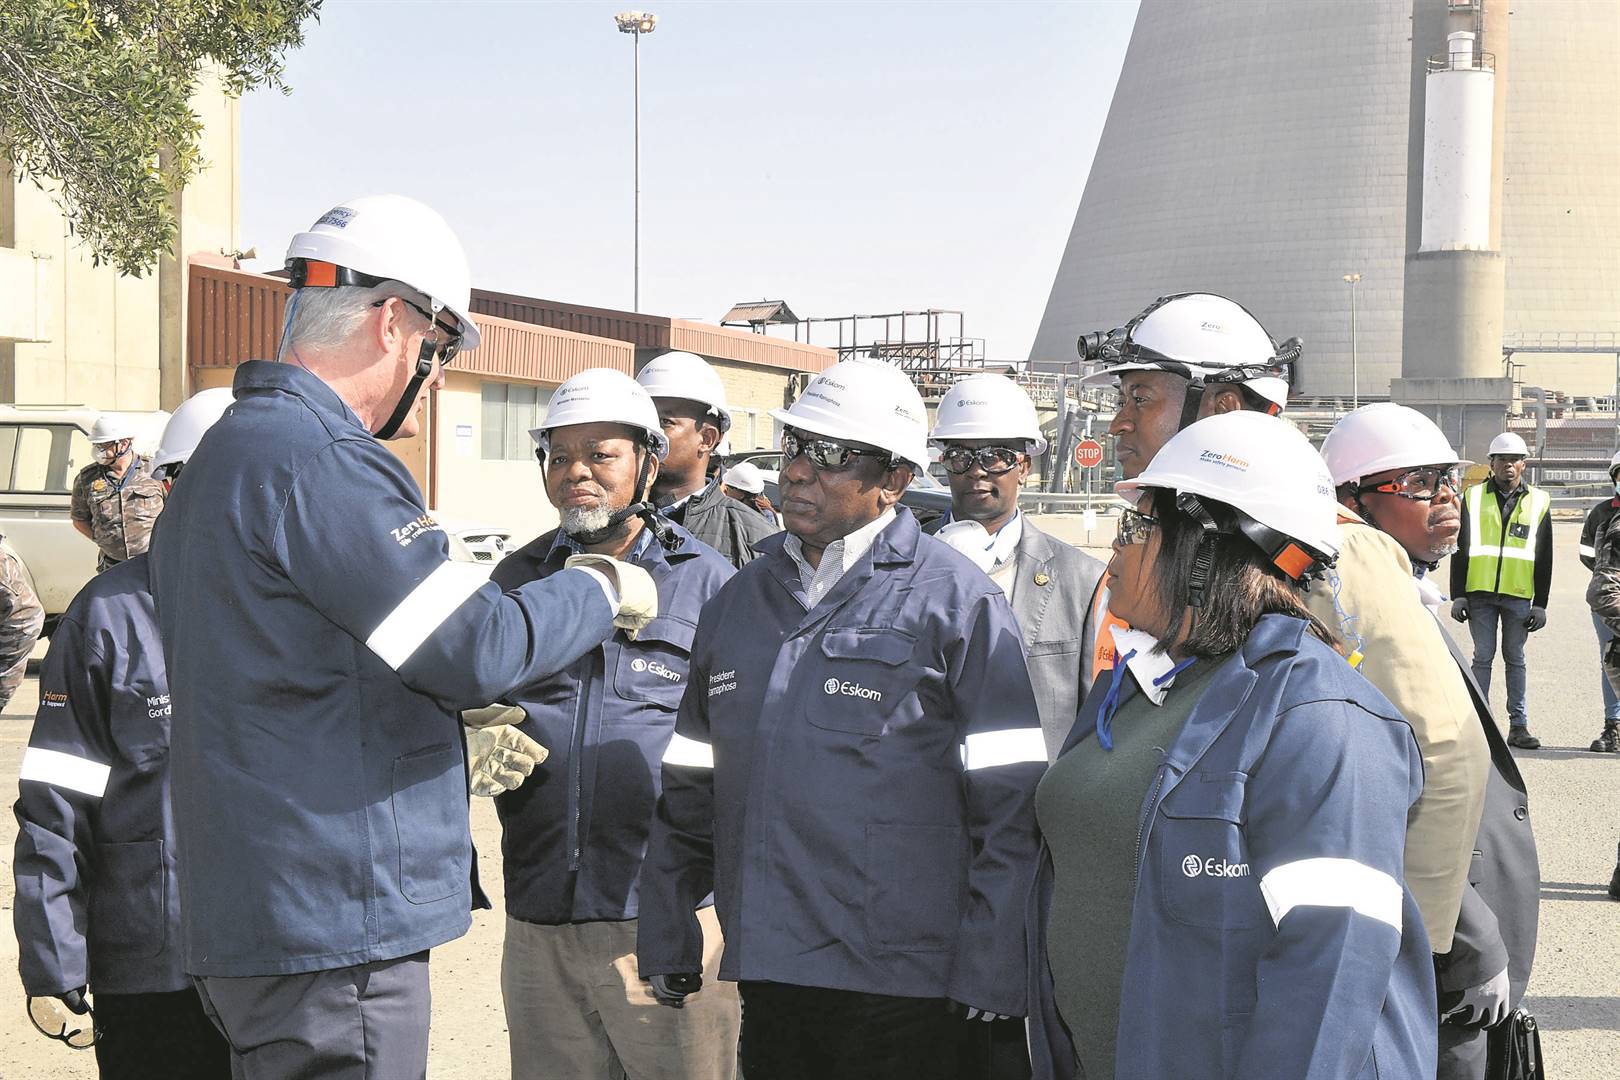 Eskom CEO André de Ruyter with President Cyril Ramaphosa and Mineral Resources and Energy Minister Gwede Mantashe visit the Tutuka Power Station to gain an understanding of the challenges affecting Eskom’s generation fleet. Photo: Kopane Tlape / GCIS